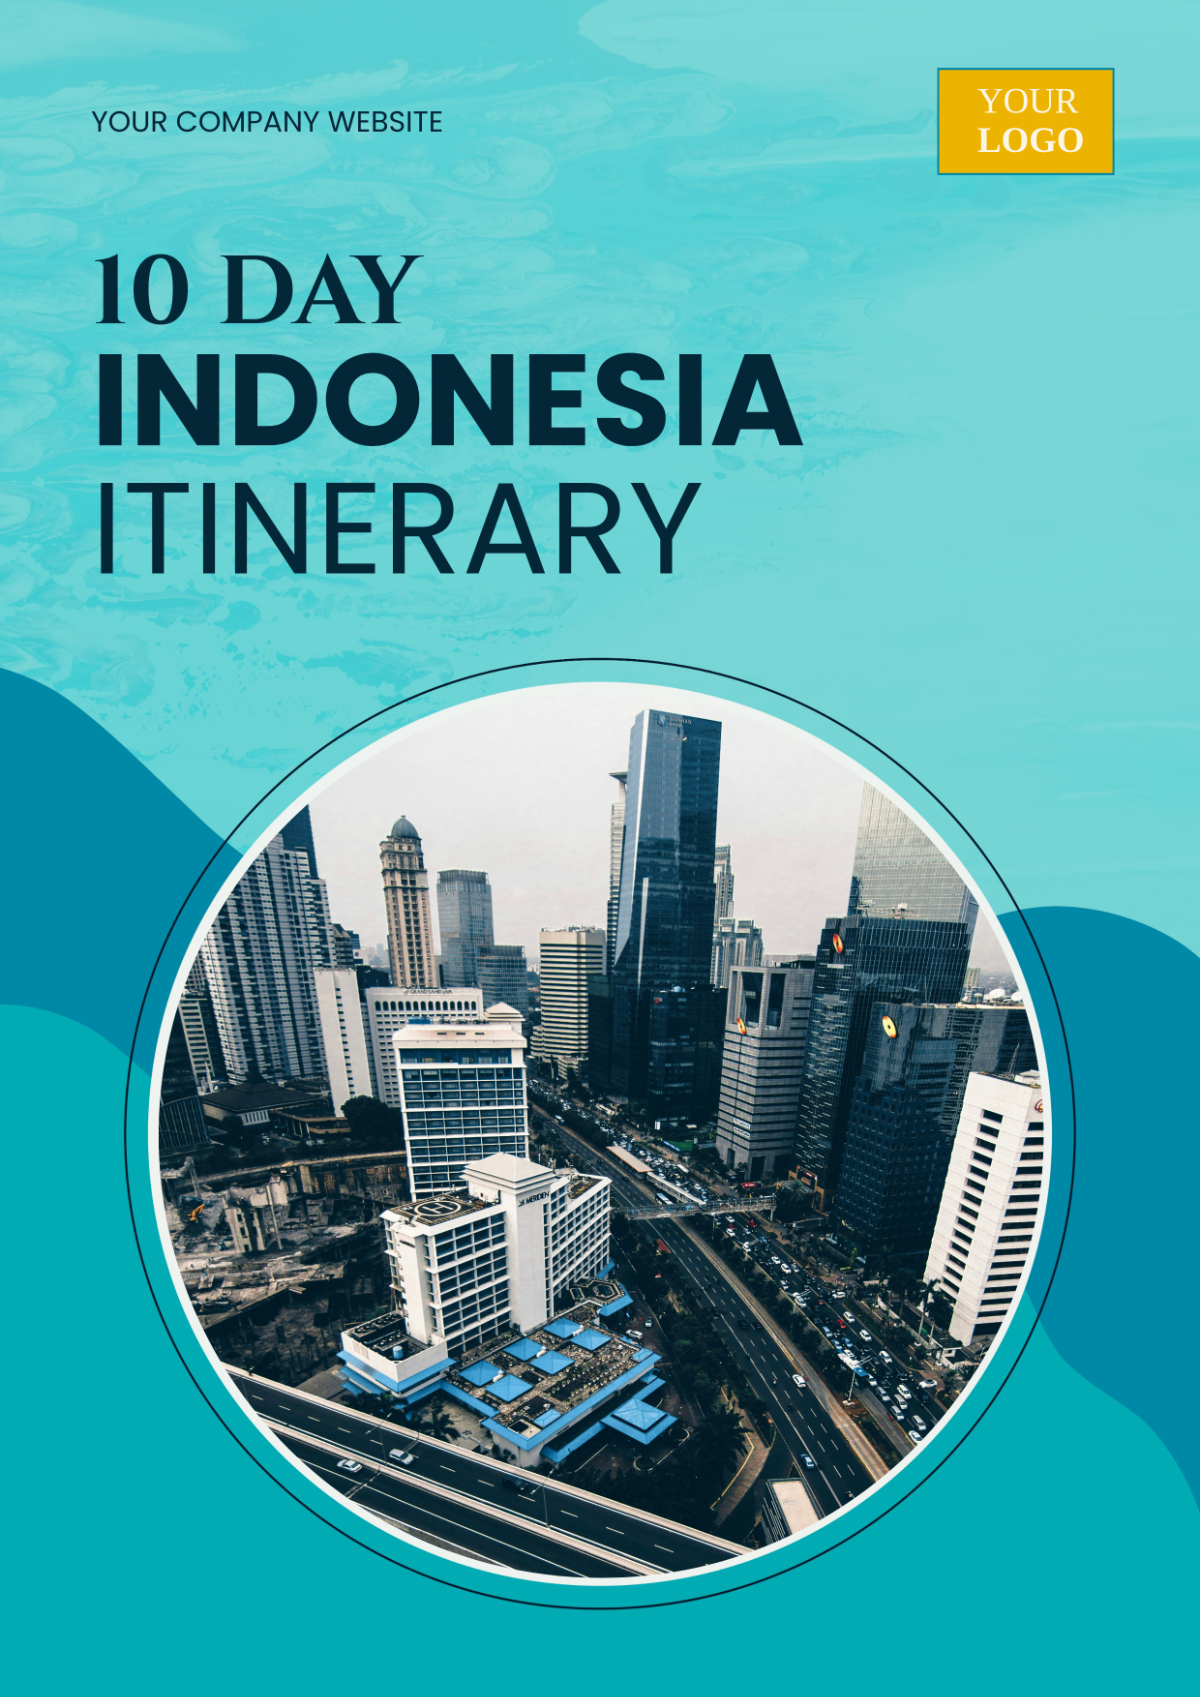 10 Day Indonesia Itinerary Template